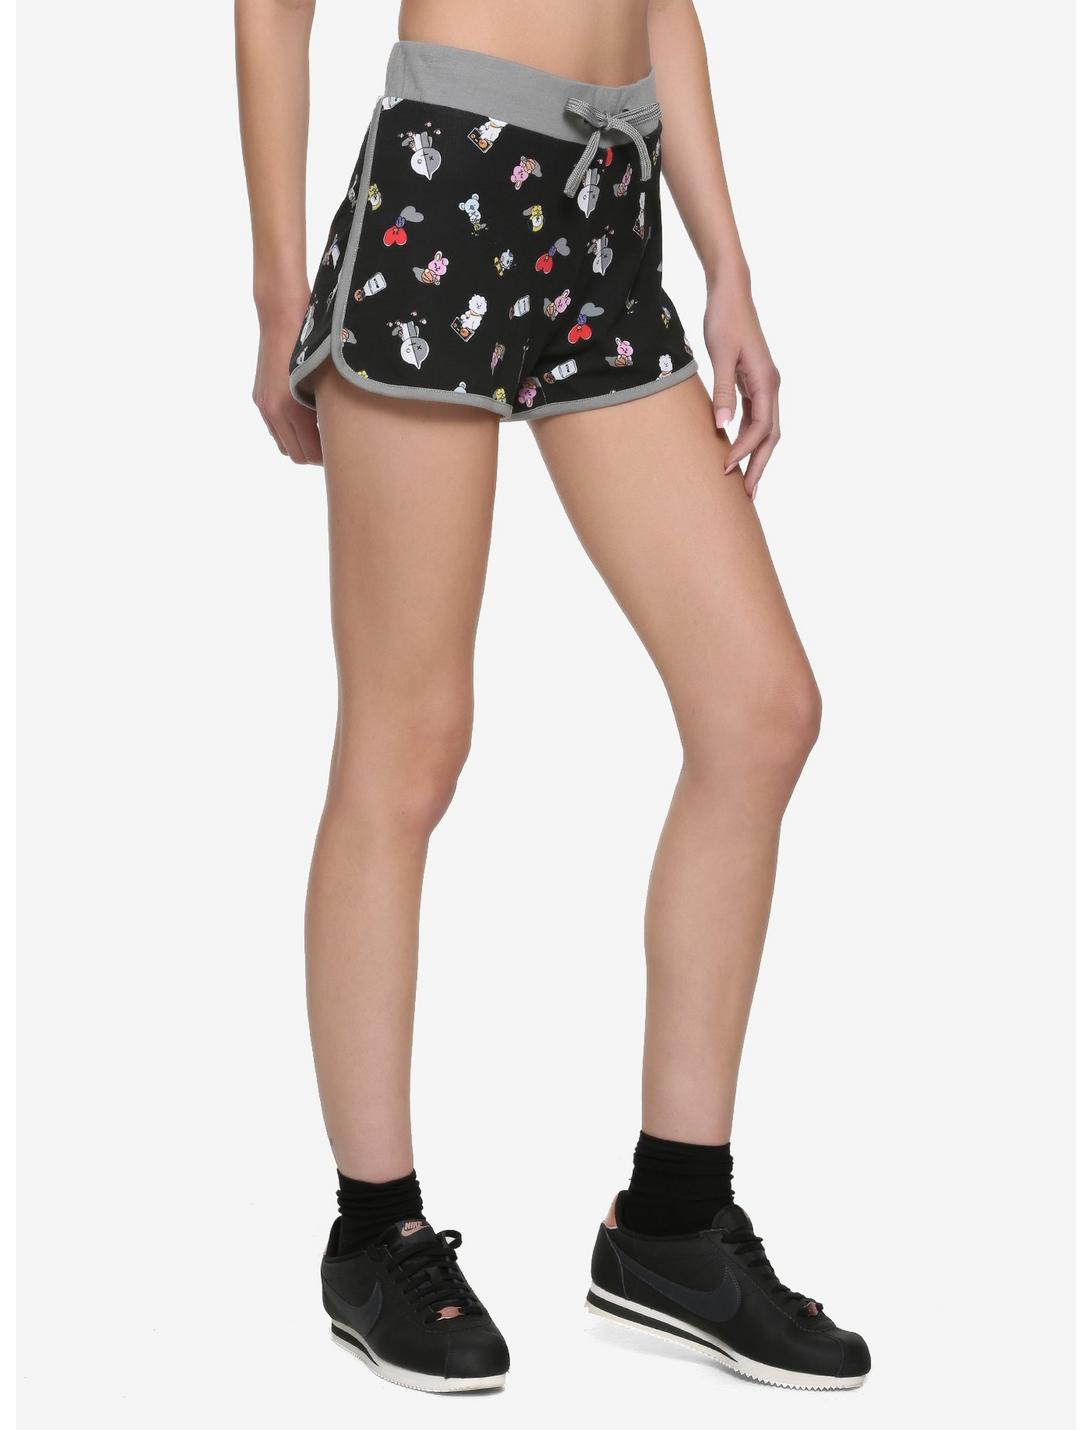 BT21 Characters Girls Soft Shorts Hot Topic Exclusive, MULTI, hi-res